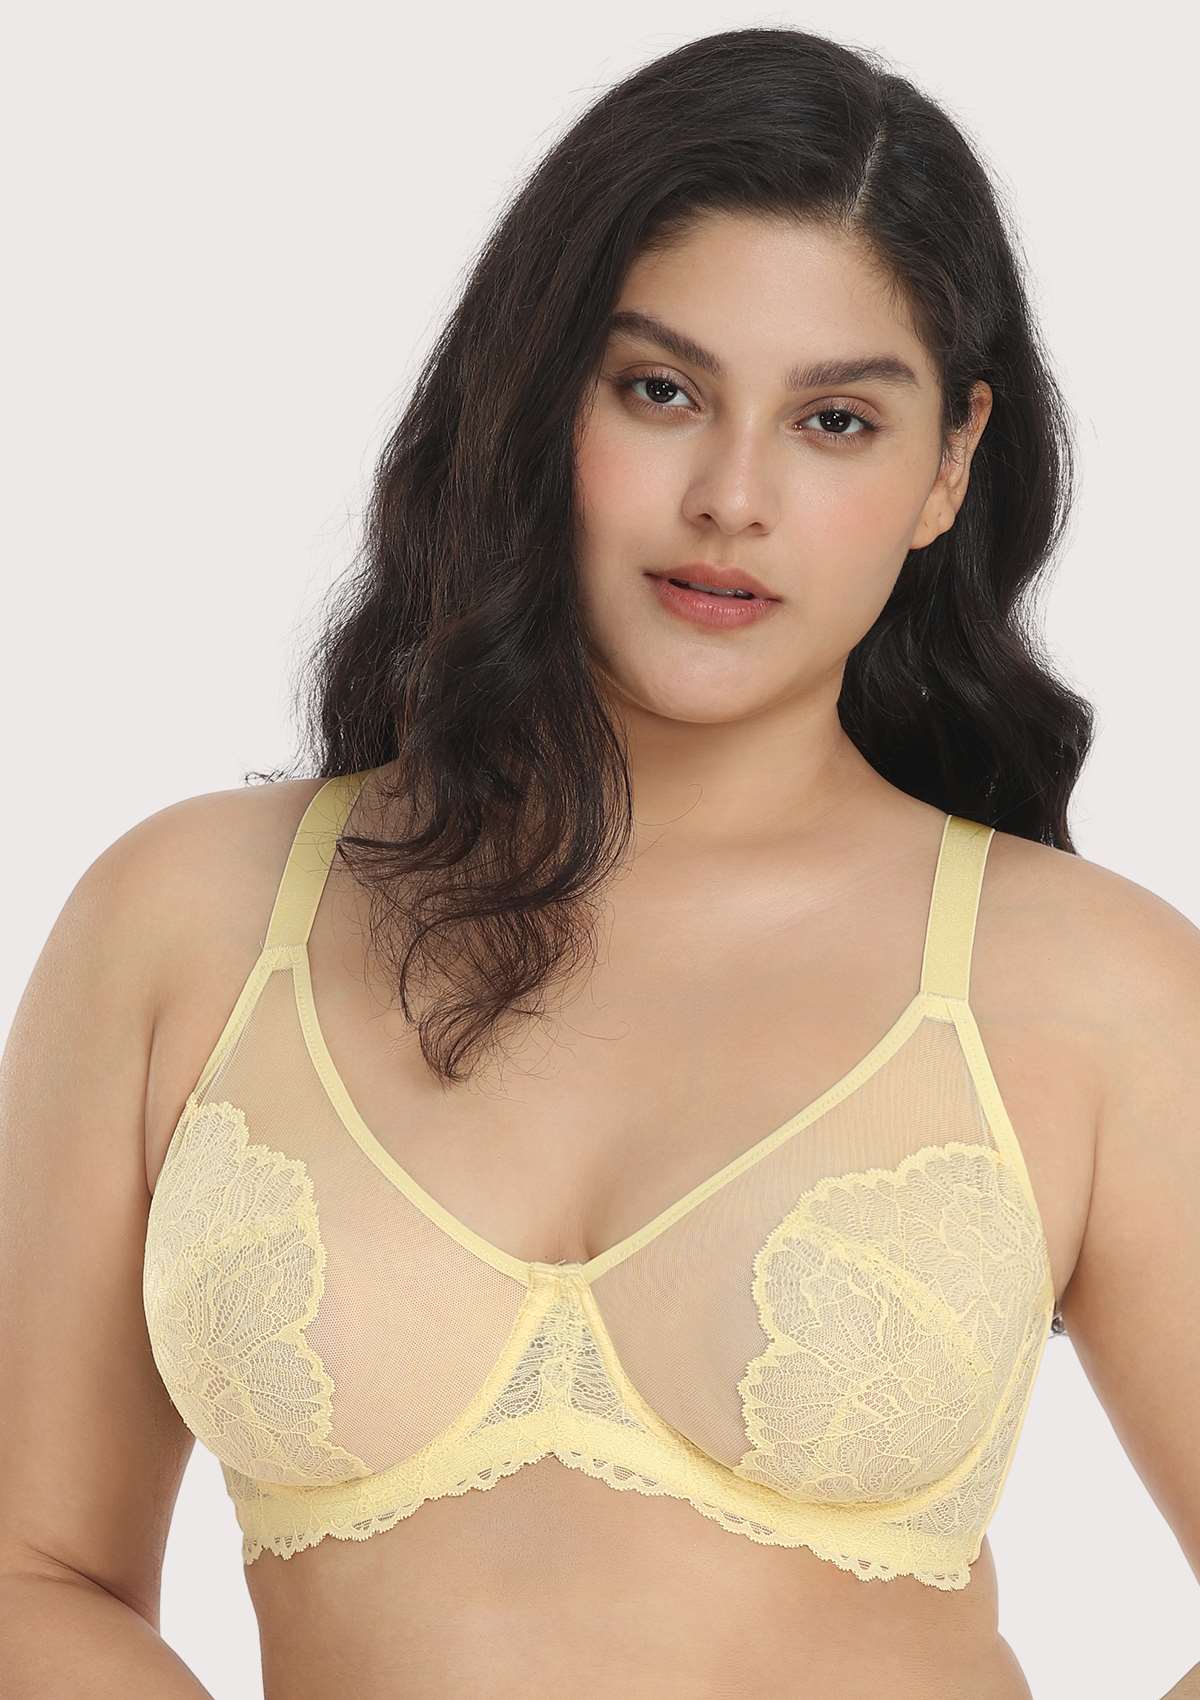 HSIA Blossom Full Coverage Side Support Bra: Designed For Heavy Busts - Light Yellow / 40 / C